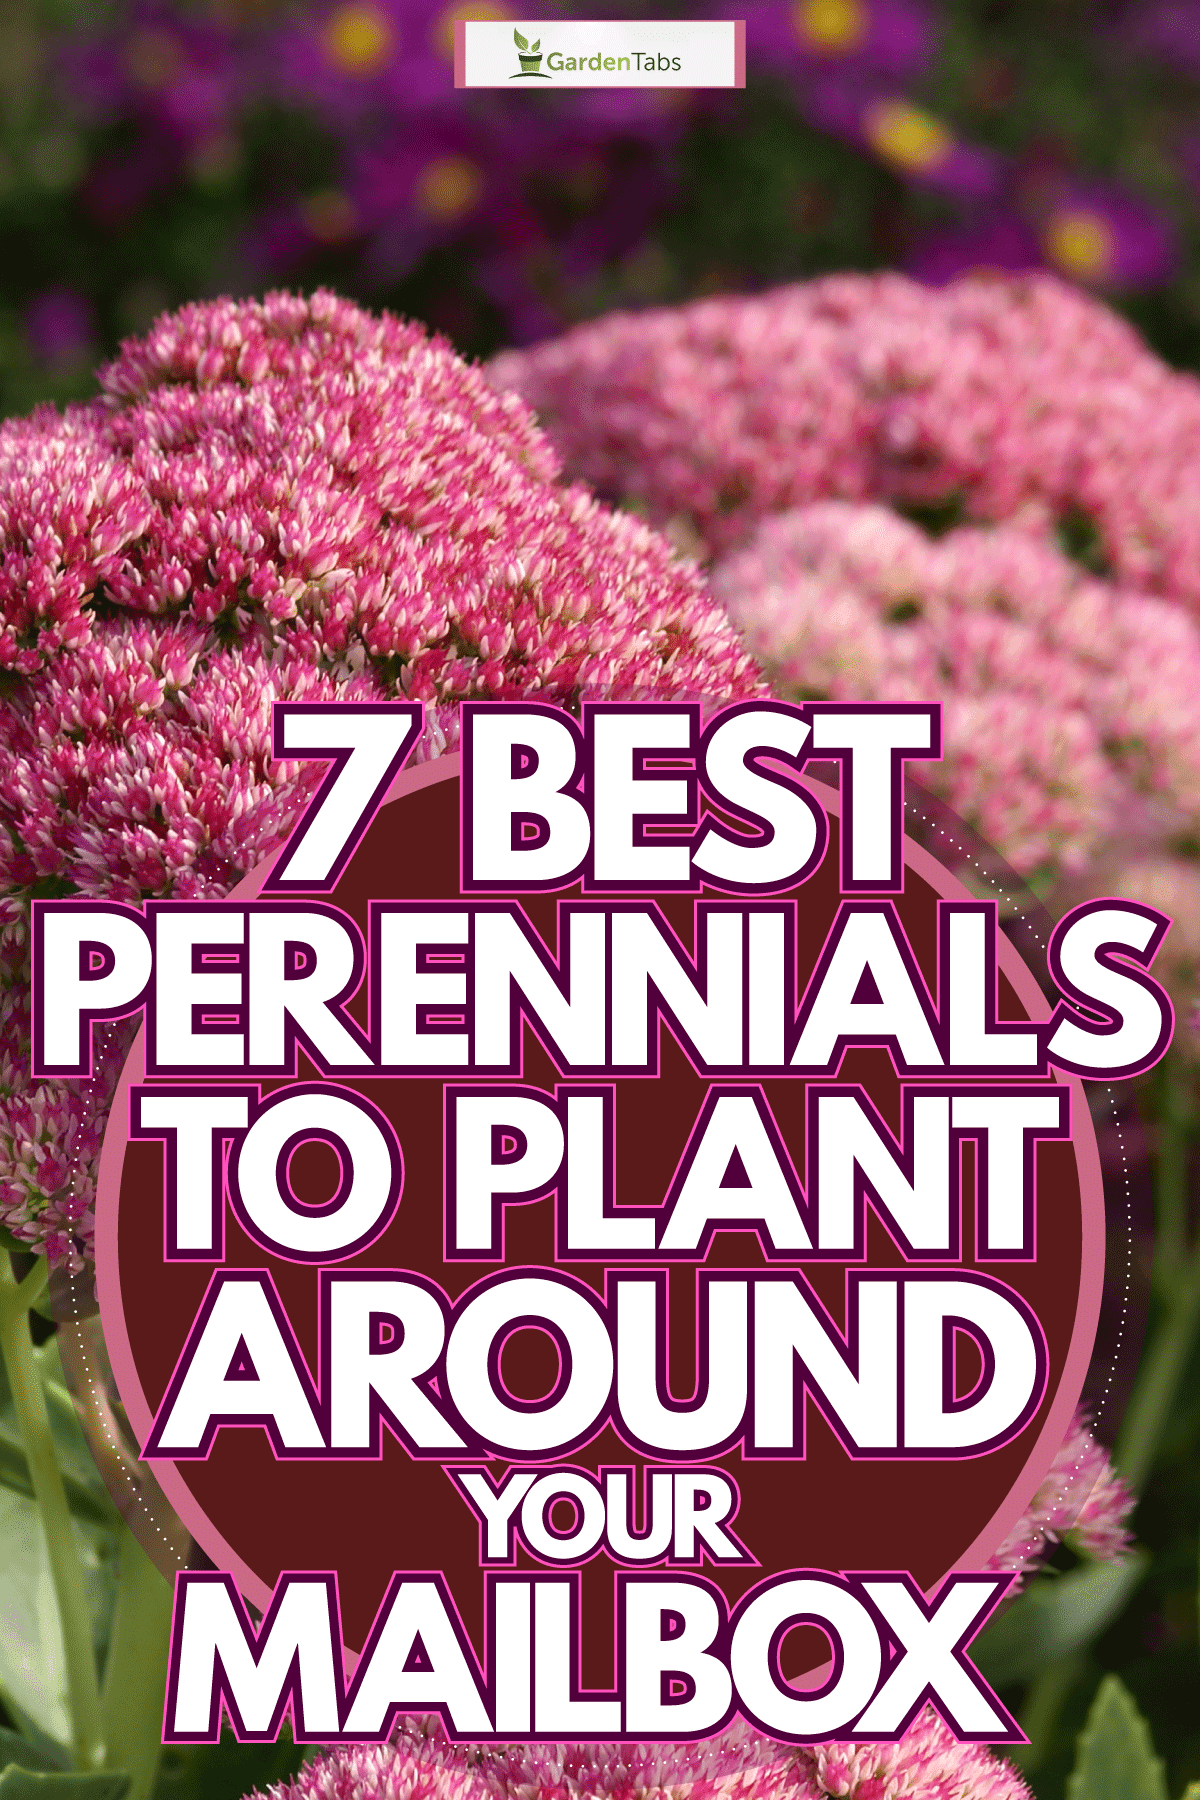 Up close photo of a perennial flower at a garden, 7 Best Perennials to Plant Around Your Mailbox